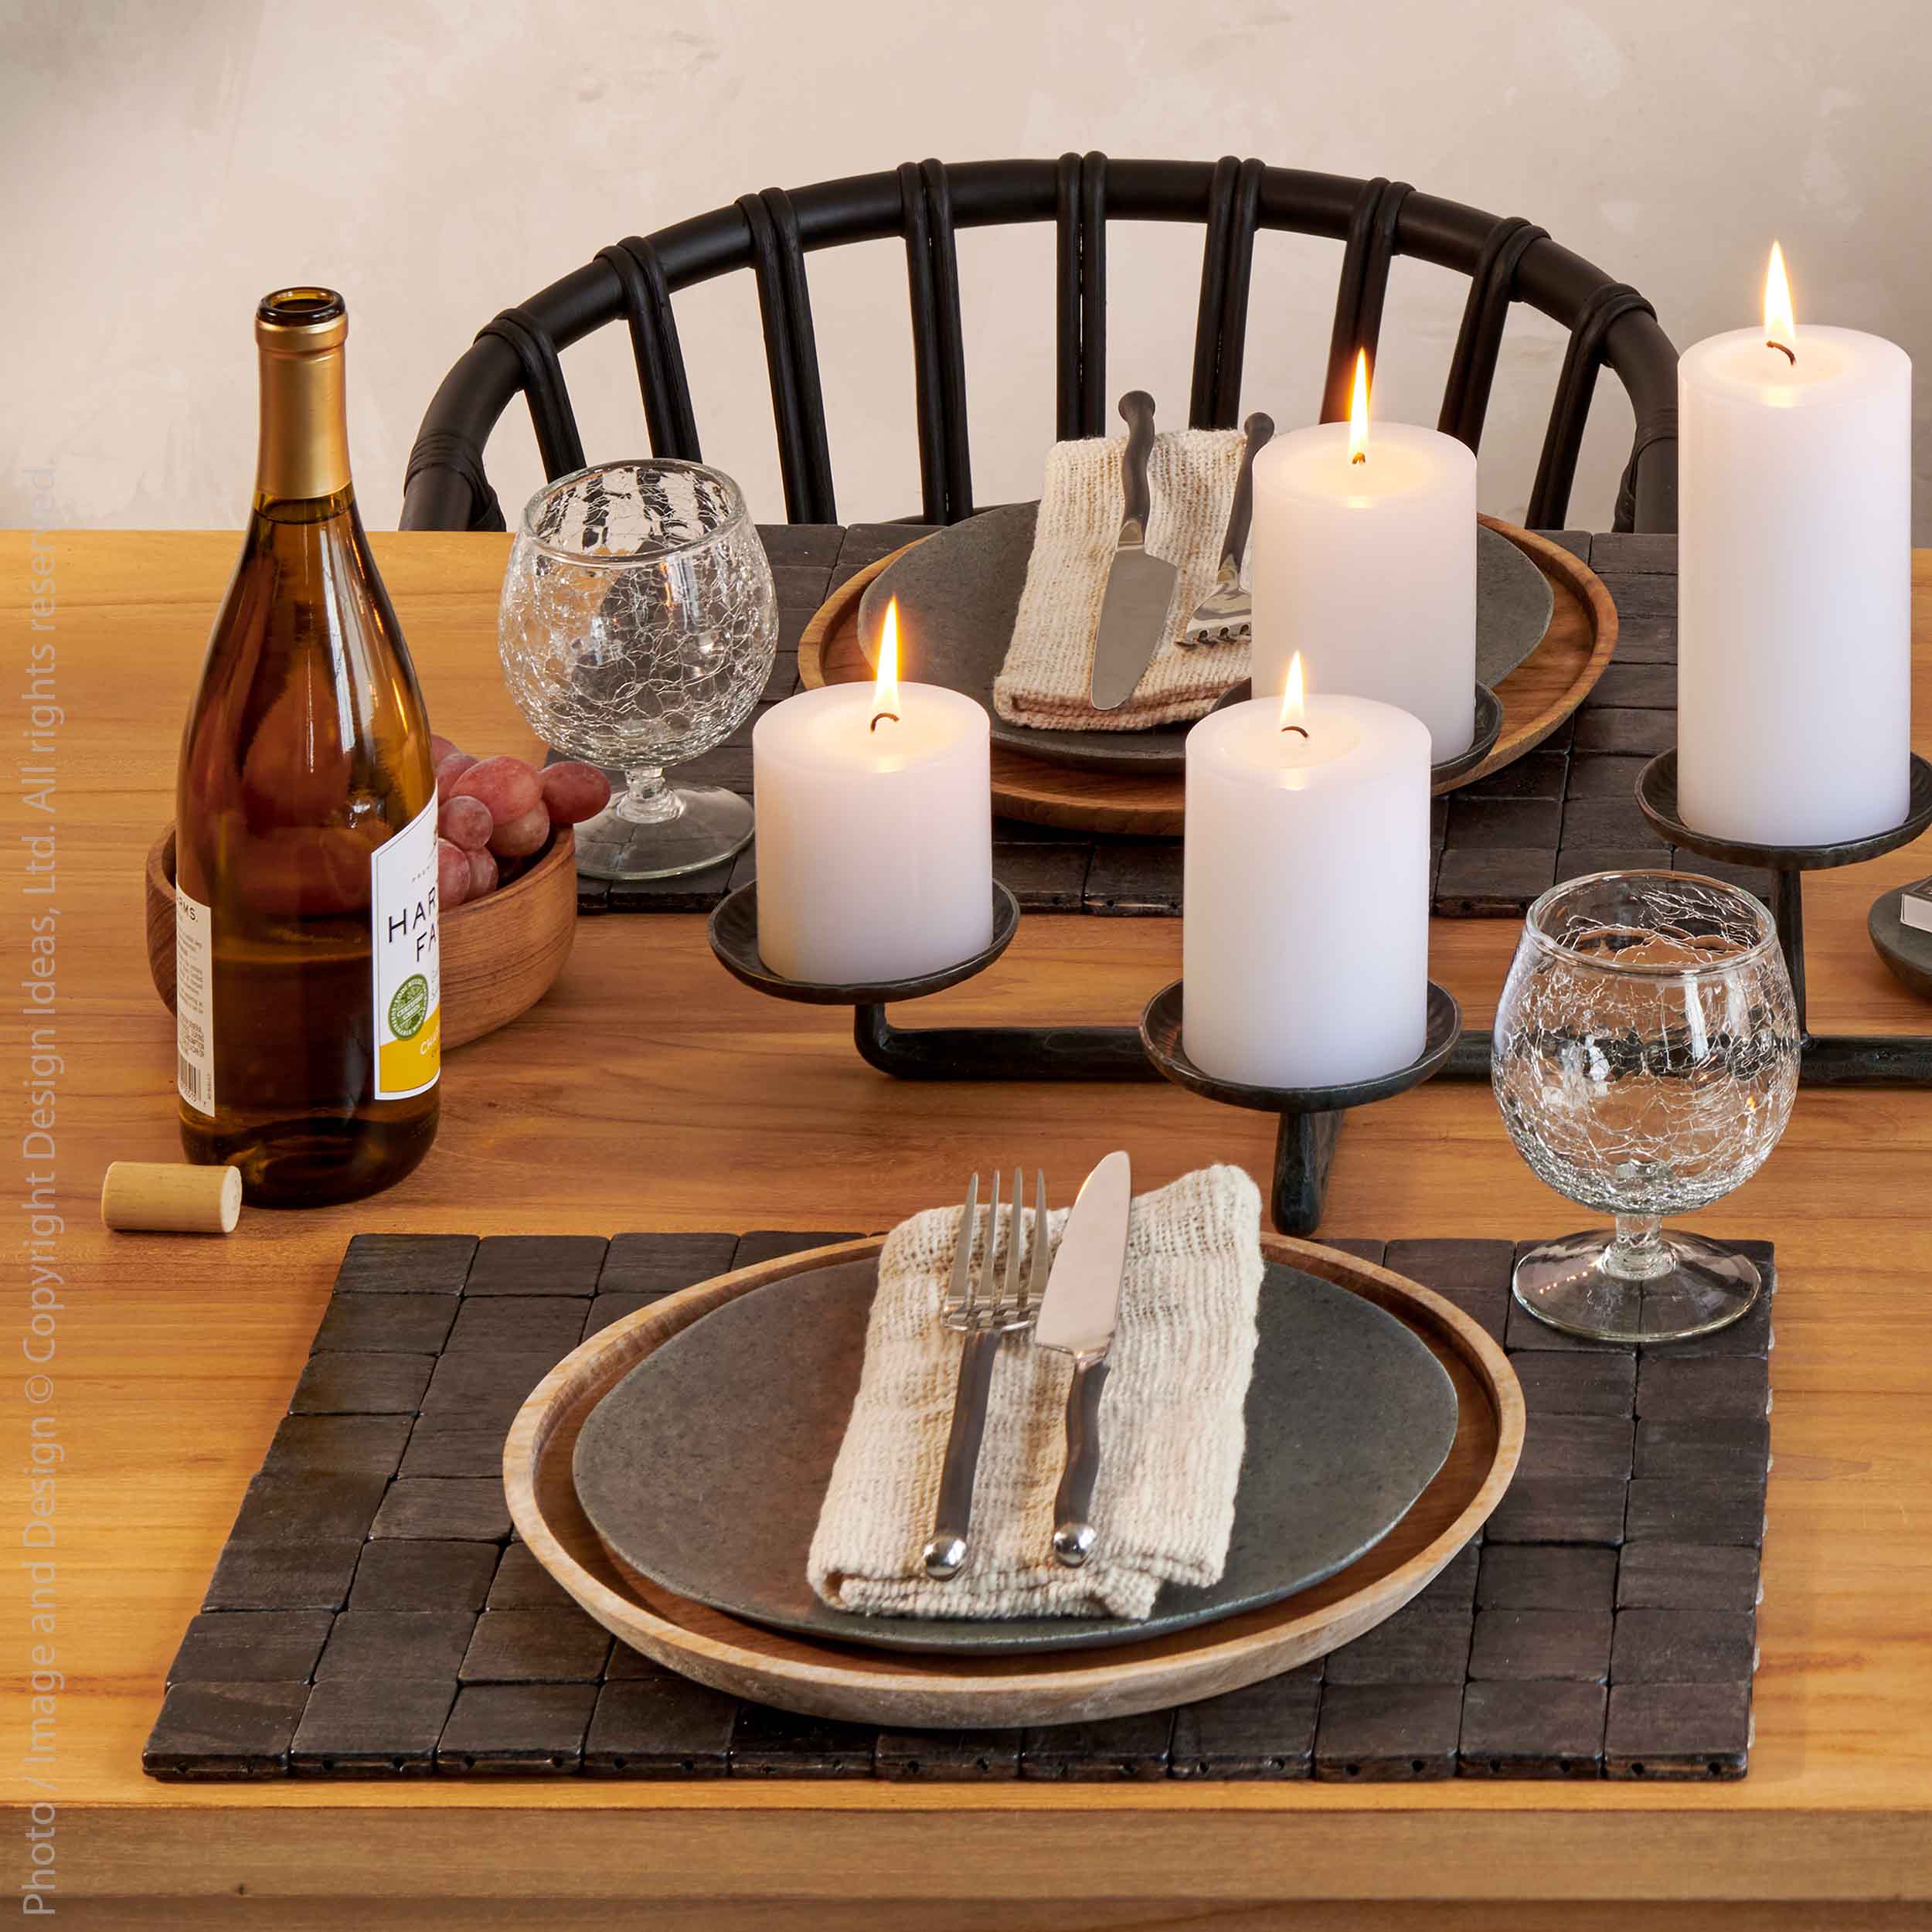 Bremen™ Sliced Acacia Wood Placemat Joined with String - (colors: Natural, Black) | Premium Placemat from the Bremen™ collection | made with Acacia Wood for long lasting use